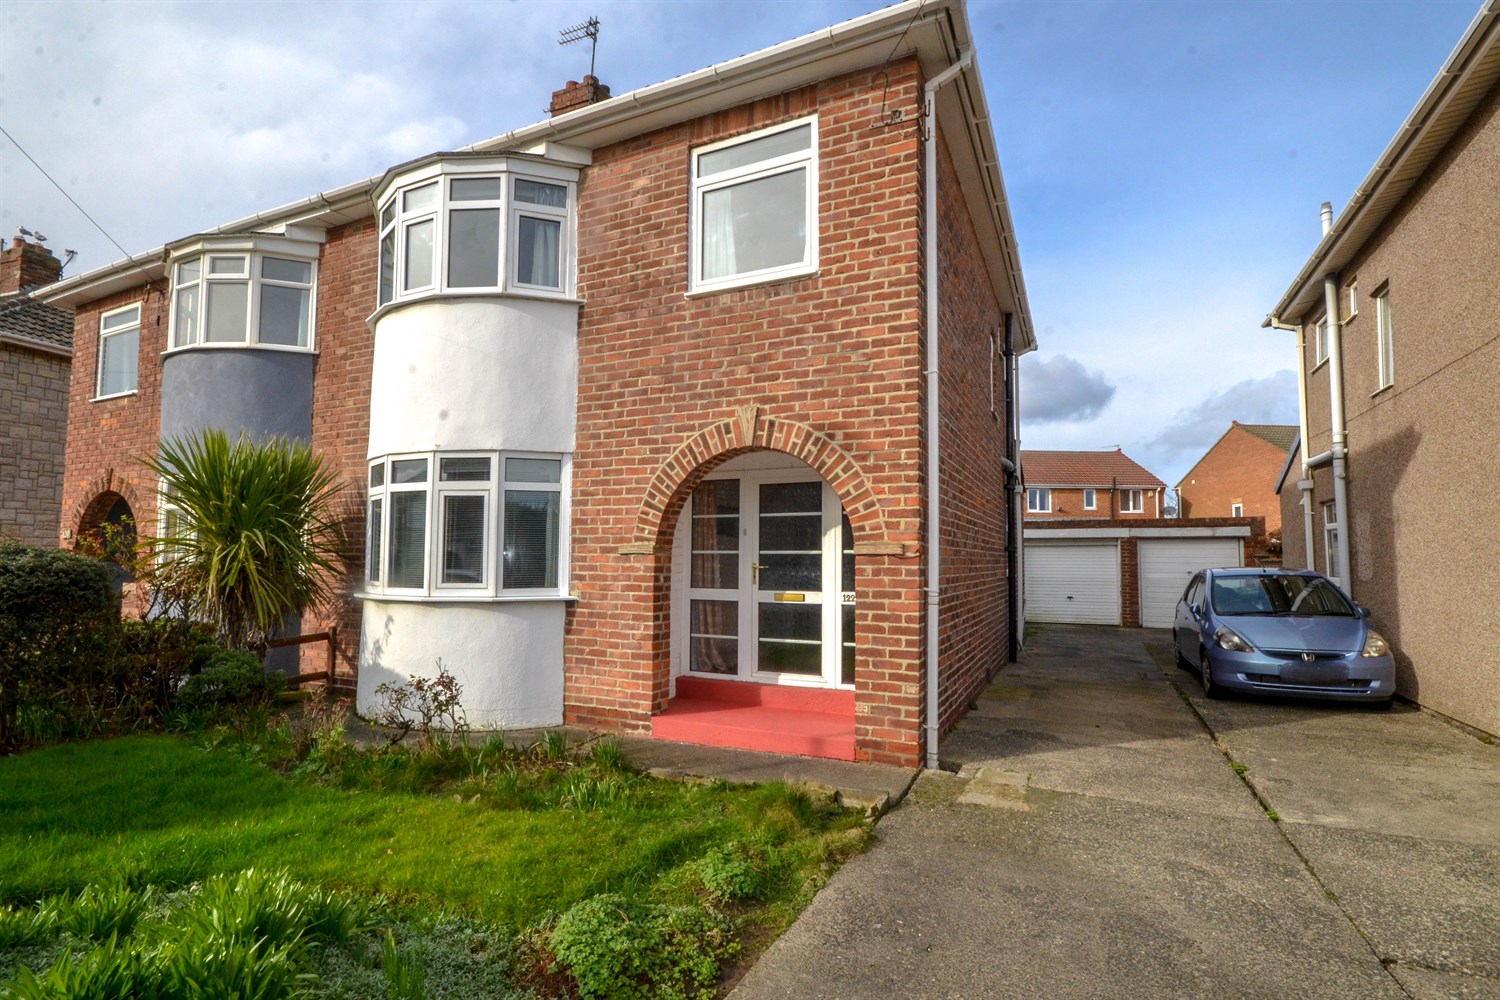 3 bed semi-detached house for sale in Cheviot Road, South Shields - Property Image 1